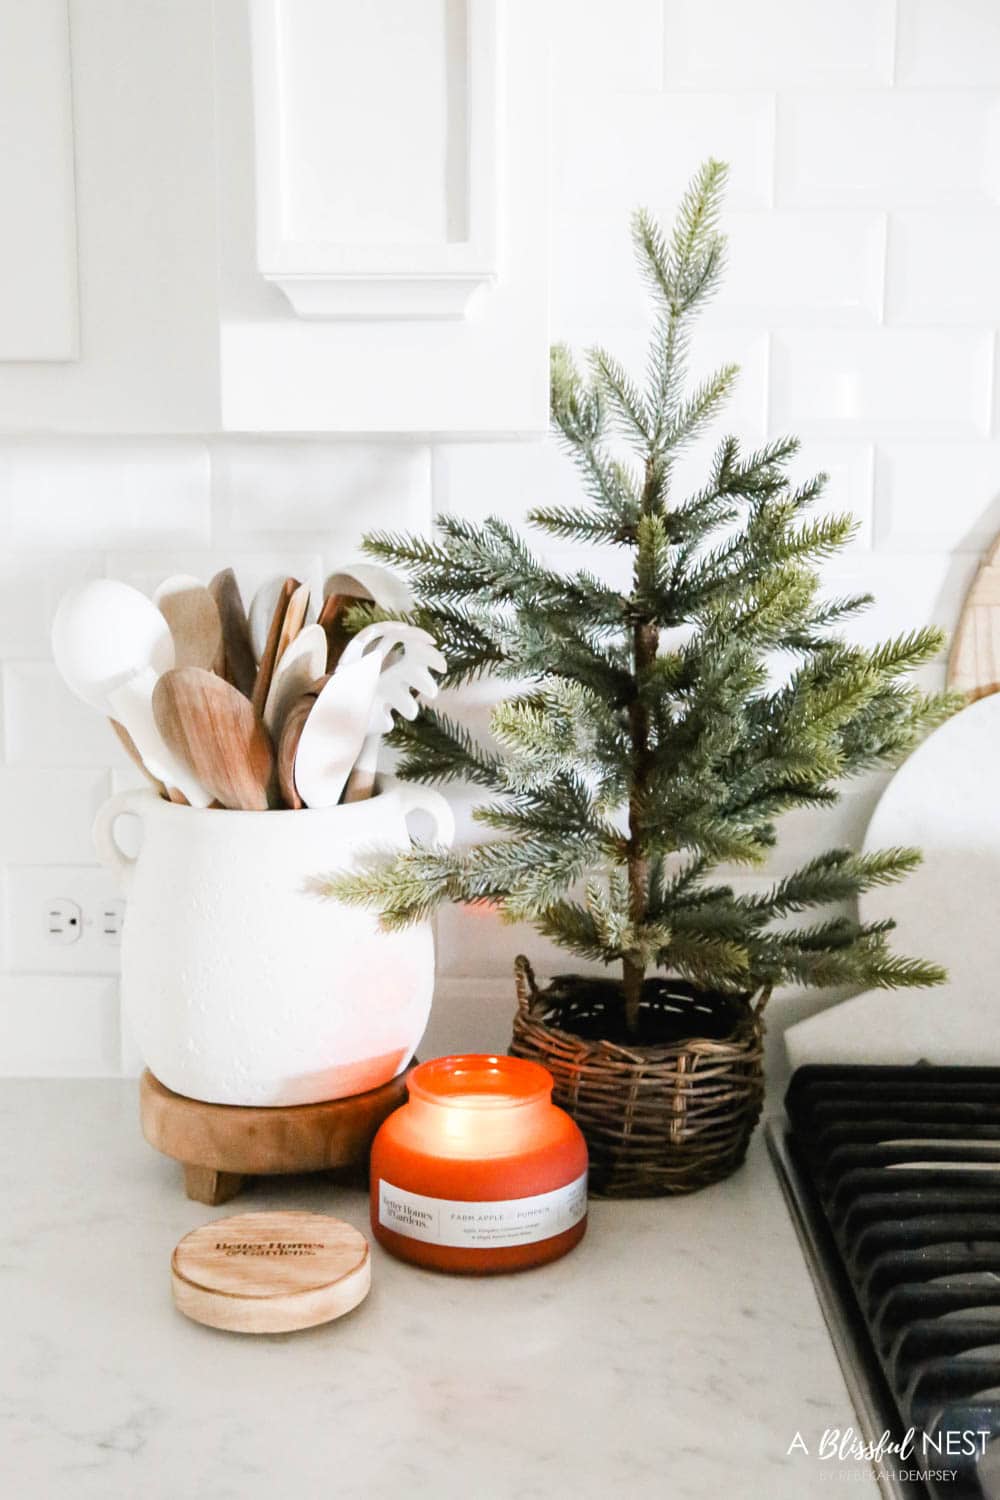 A yummy smelling candle burning in a kitchen next to a cooktop with a cluster of utensils in a white pot and a Christmas tree in a basket.